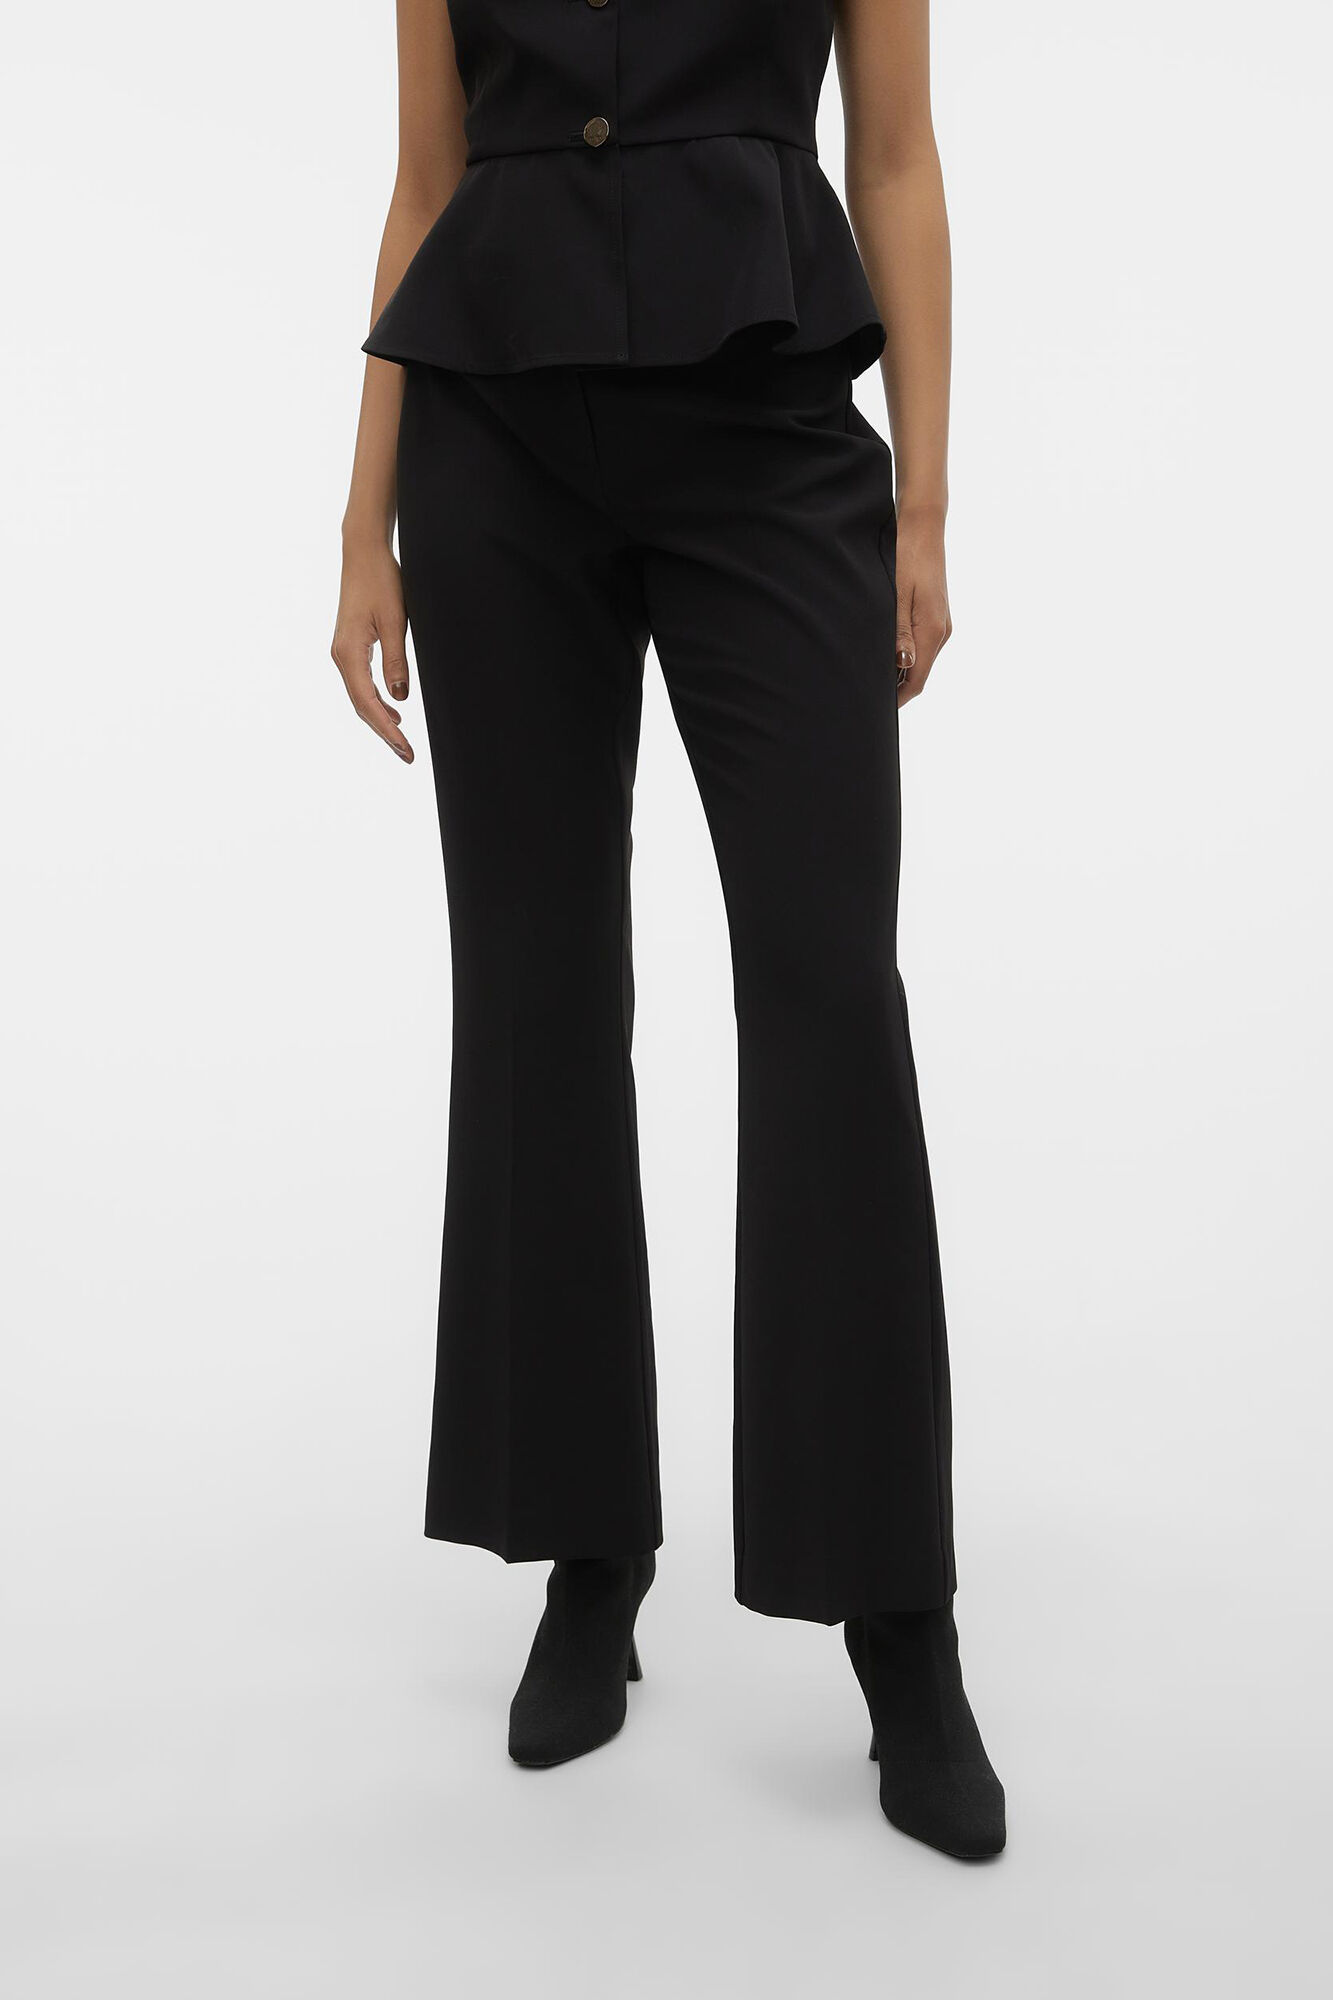 Summer High Waist Flare Pants For Women Slim White Basic Work Flared  Trousers Women With Bell Bottom Office Lady Arrival From Mu03, $16.86 |  DHgate.Com